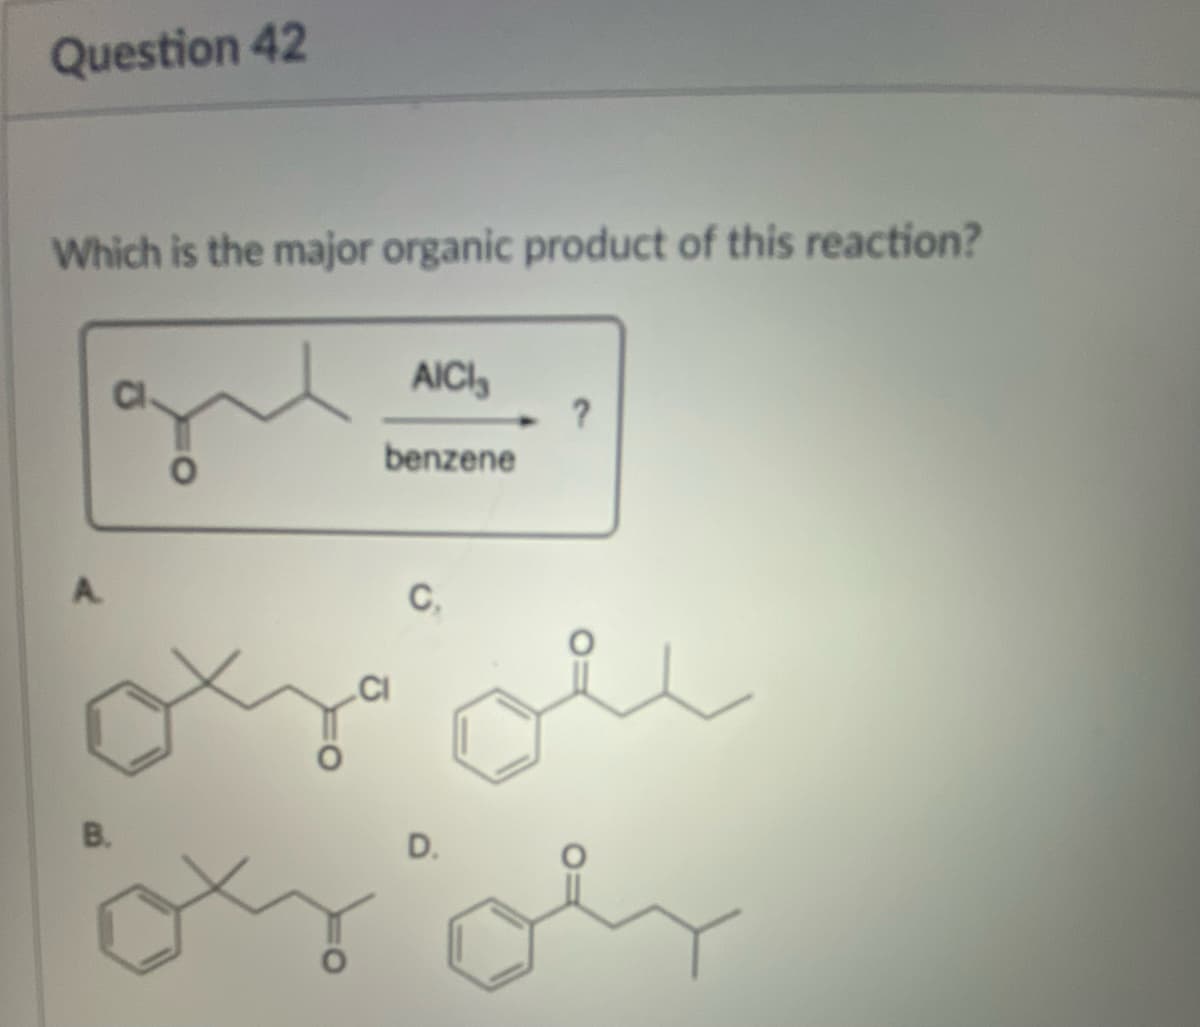 Question 42
Which is the major organic product of this reaction?
A
B.
O
AICI
benzene
C,
D.
?